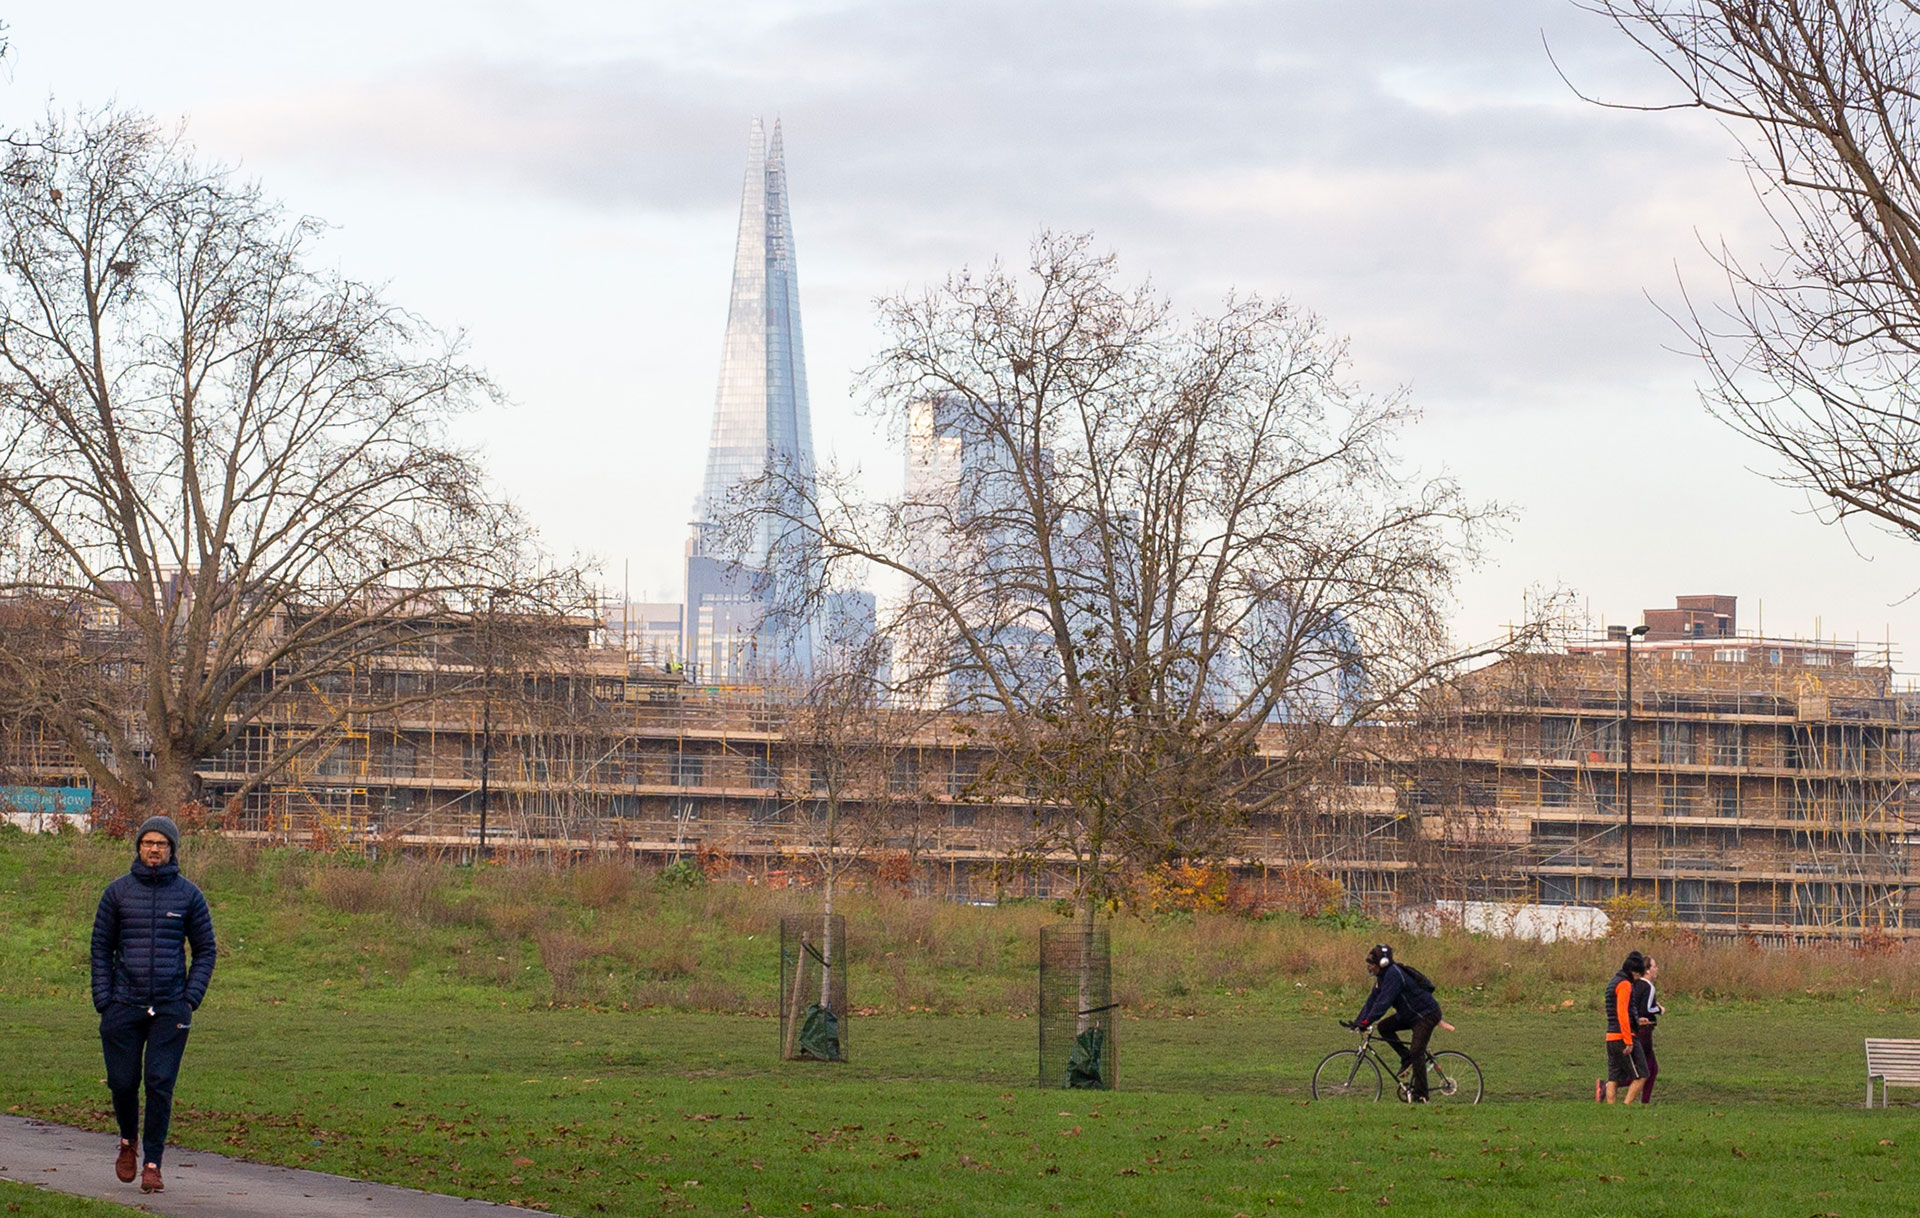 Park in south London with the Shard in the background